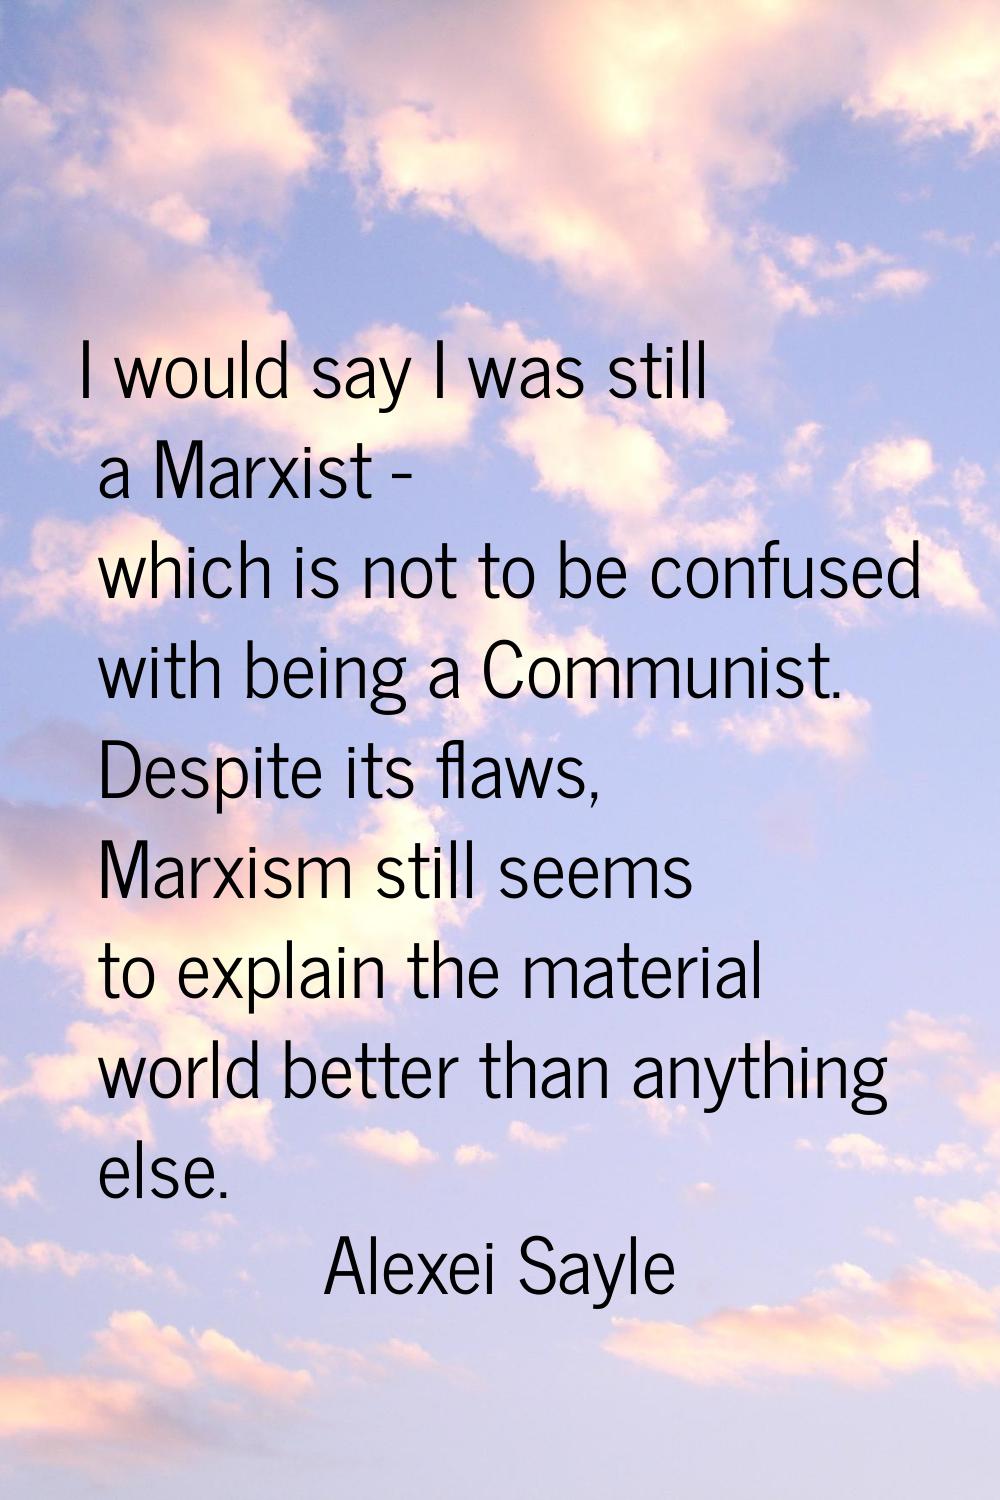 I would say I was still a Marxist - which is not to be confused with being a Communist. Despite its